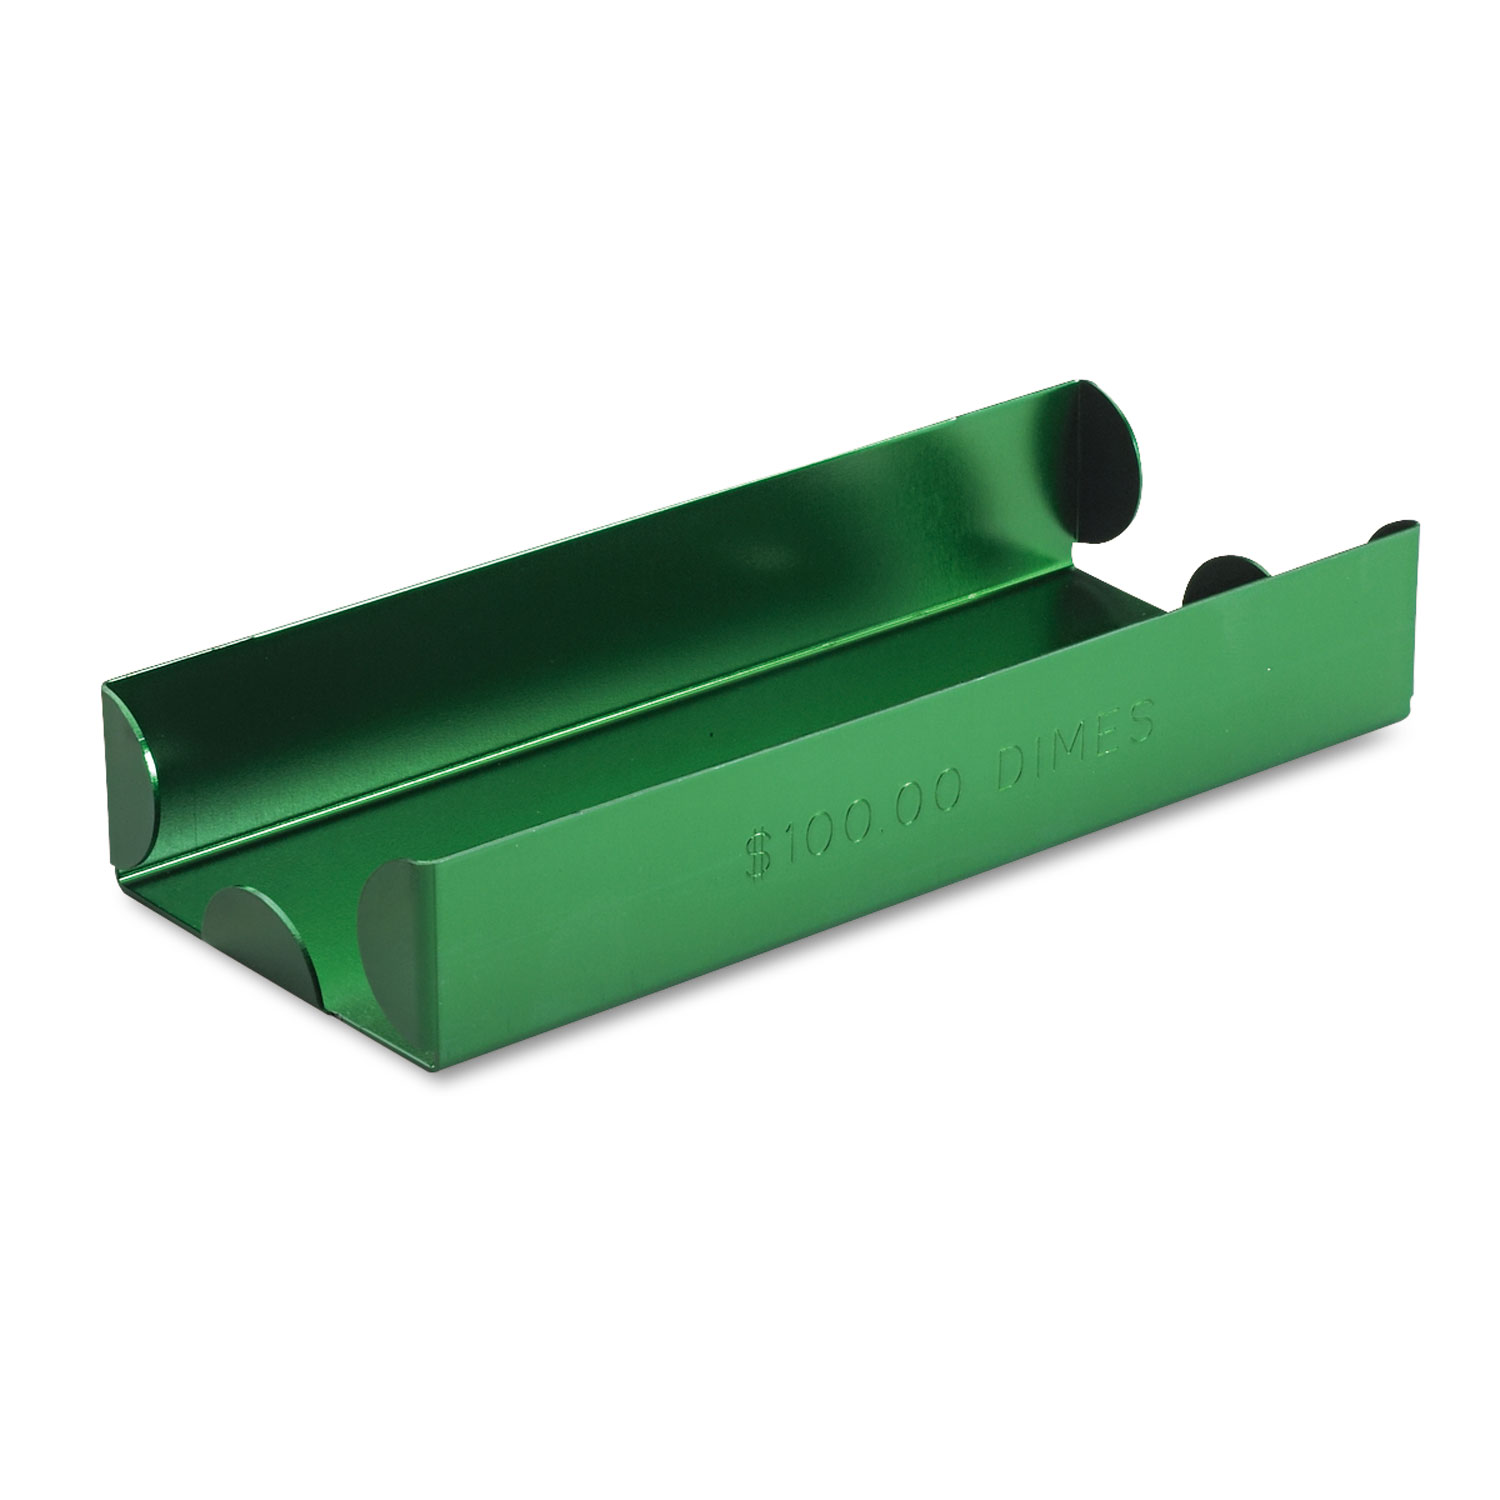 Rolled Coin Aluminum Tray w/Denomination & Quantity Etched on Side, Green